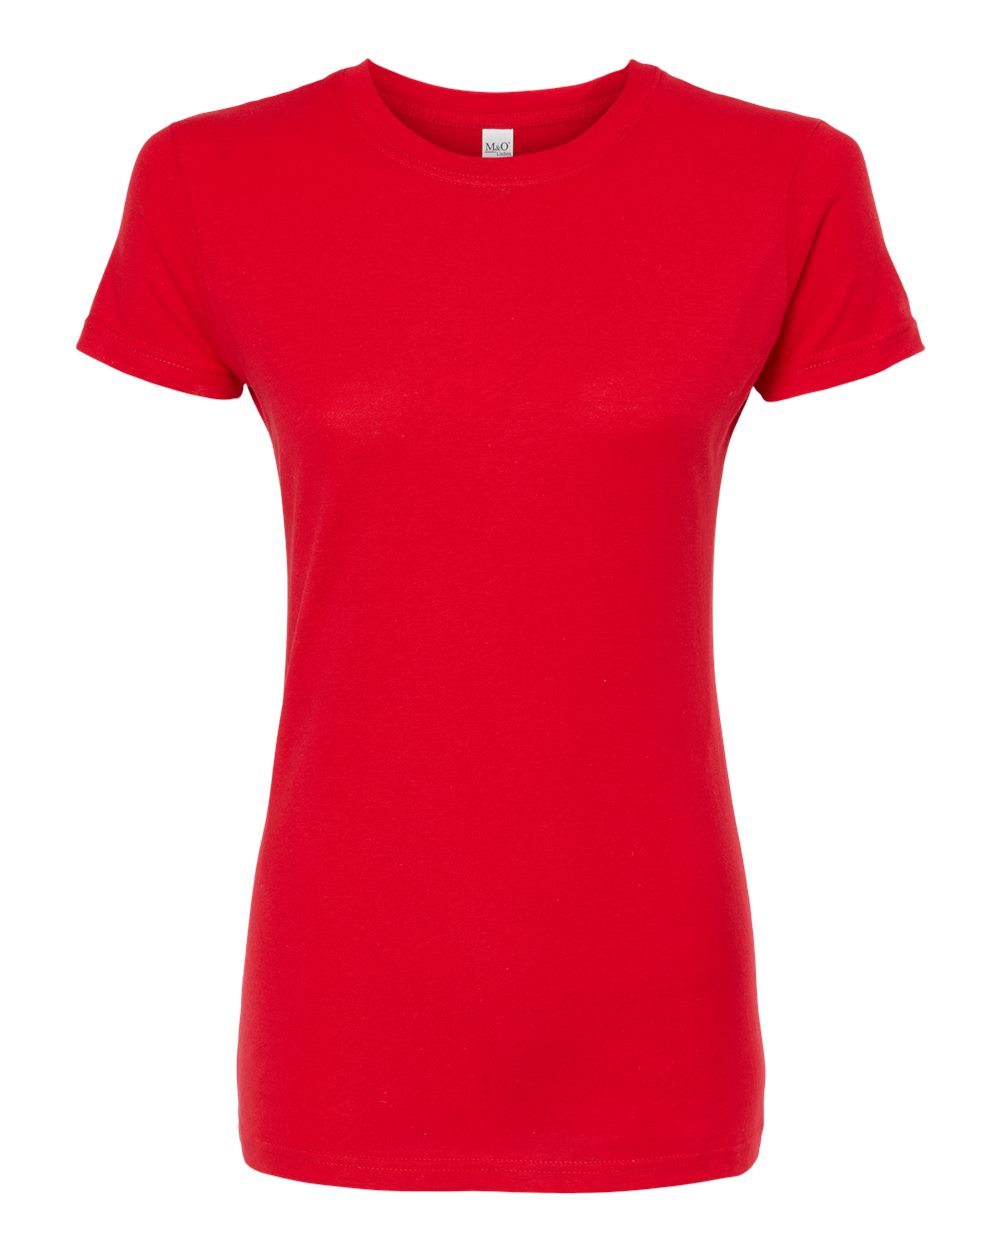 M&O Women's Fine Jersey T-Shirt 4513 #color_Fine Red